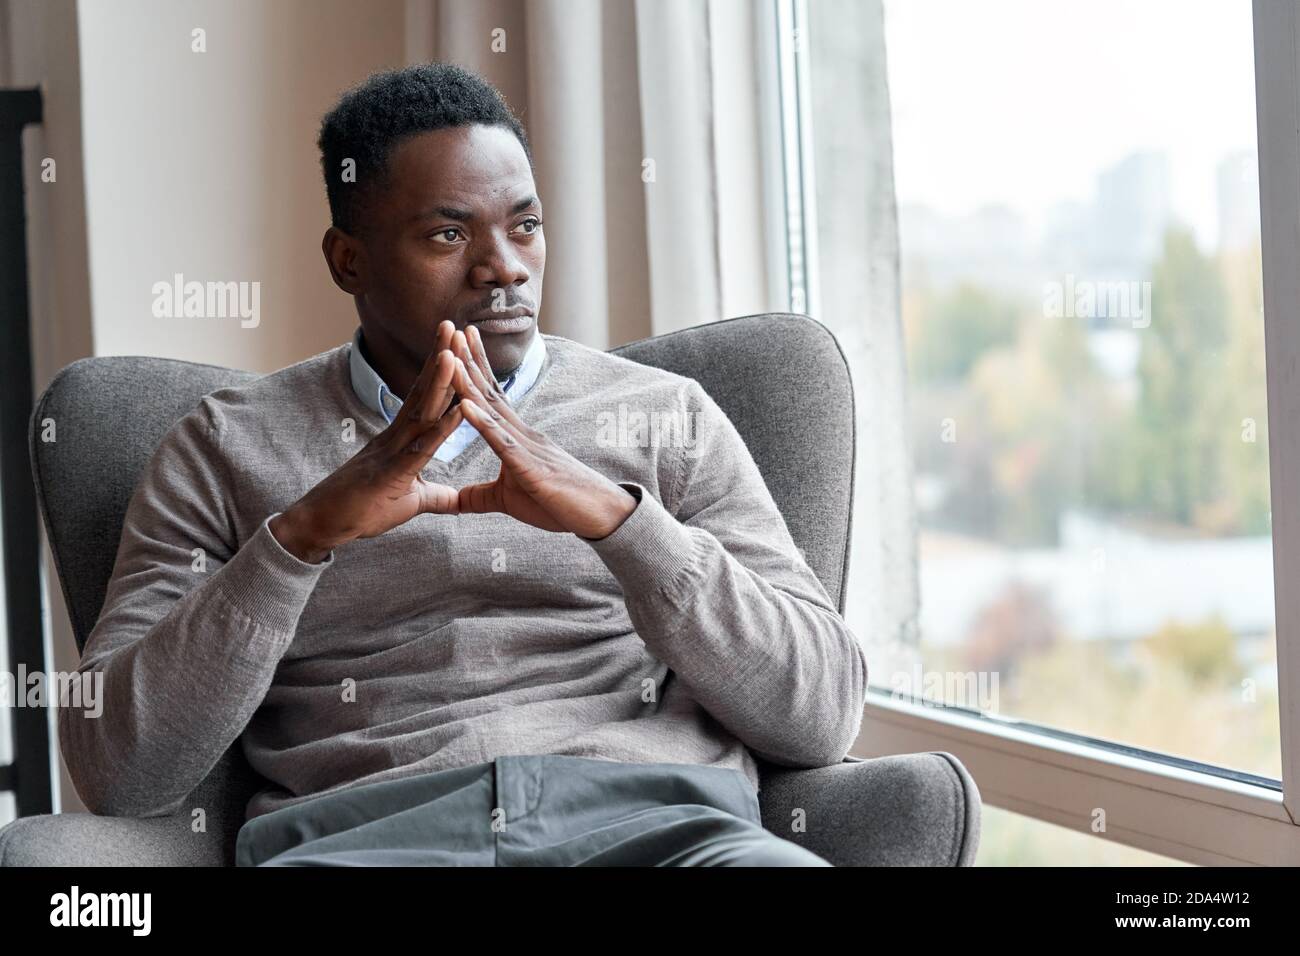 Confident stylish black man sitting in chair at home looking through window. Stock Photo